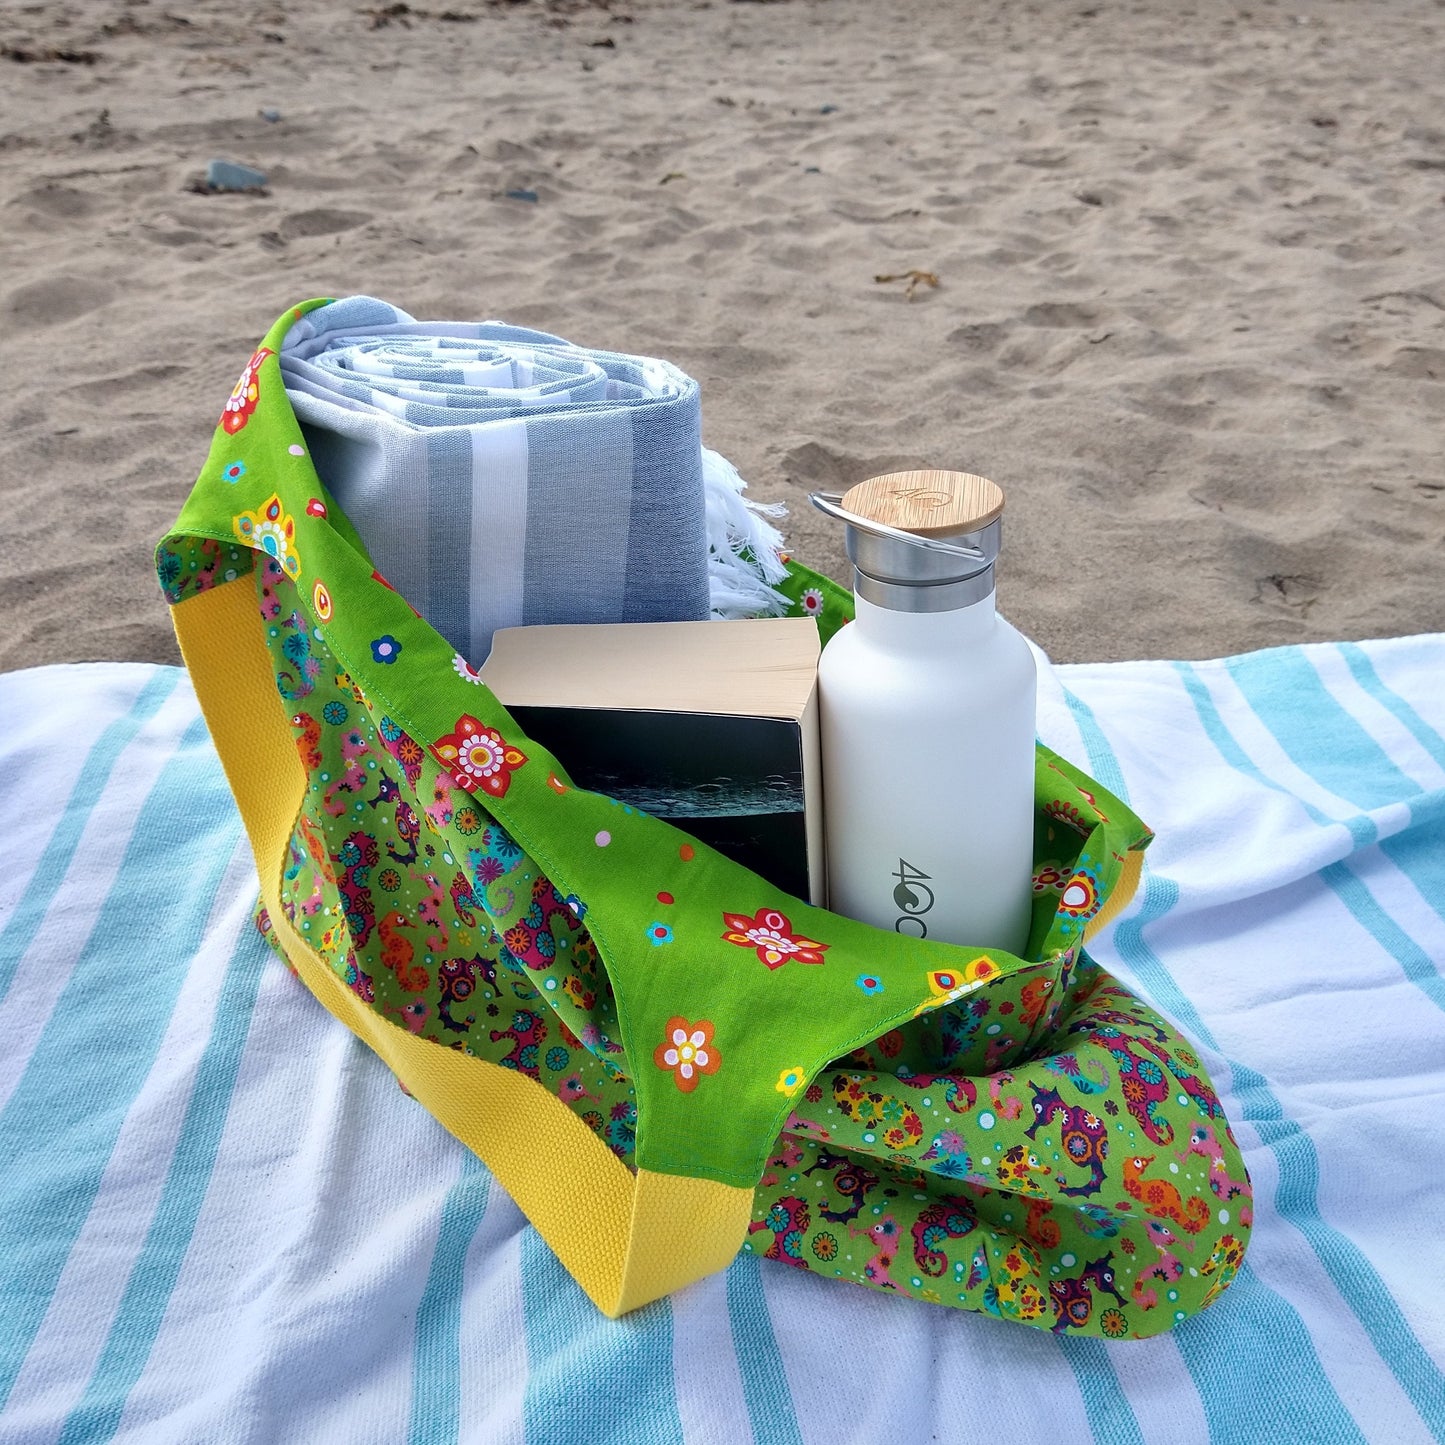 Shopping/Beach bag, reversible, size large, green seahorses (Handmade in Canada)